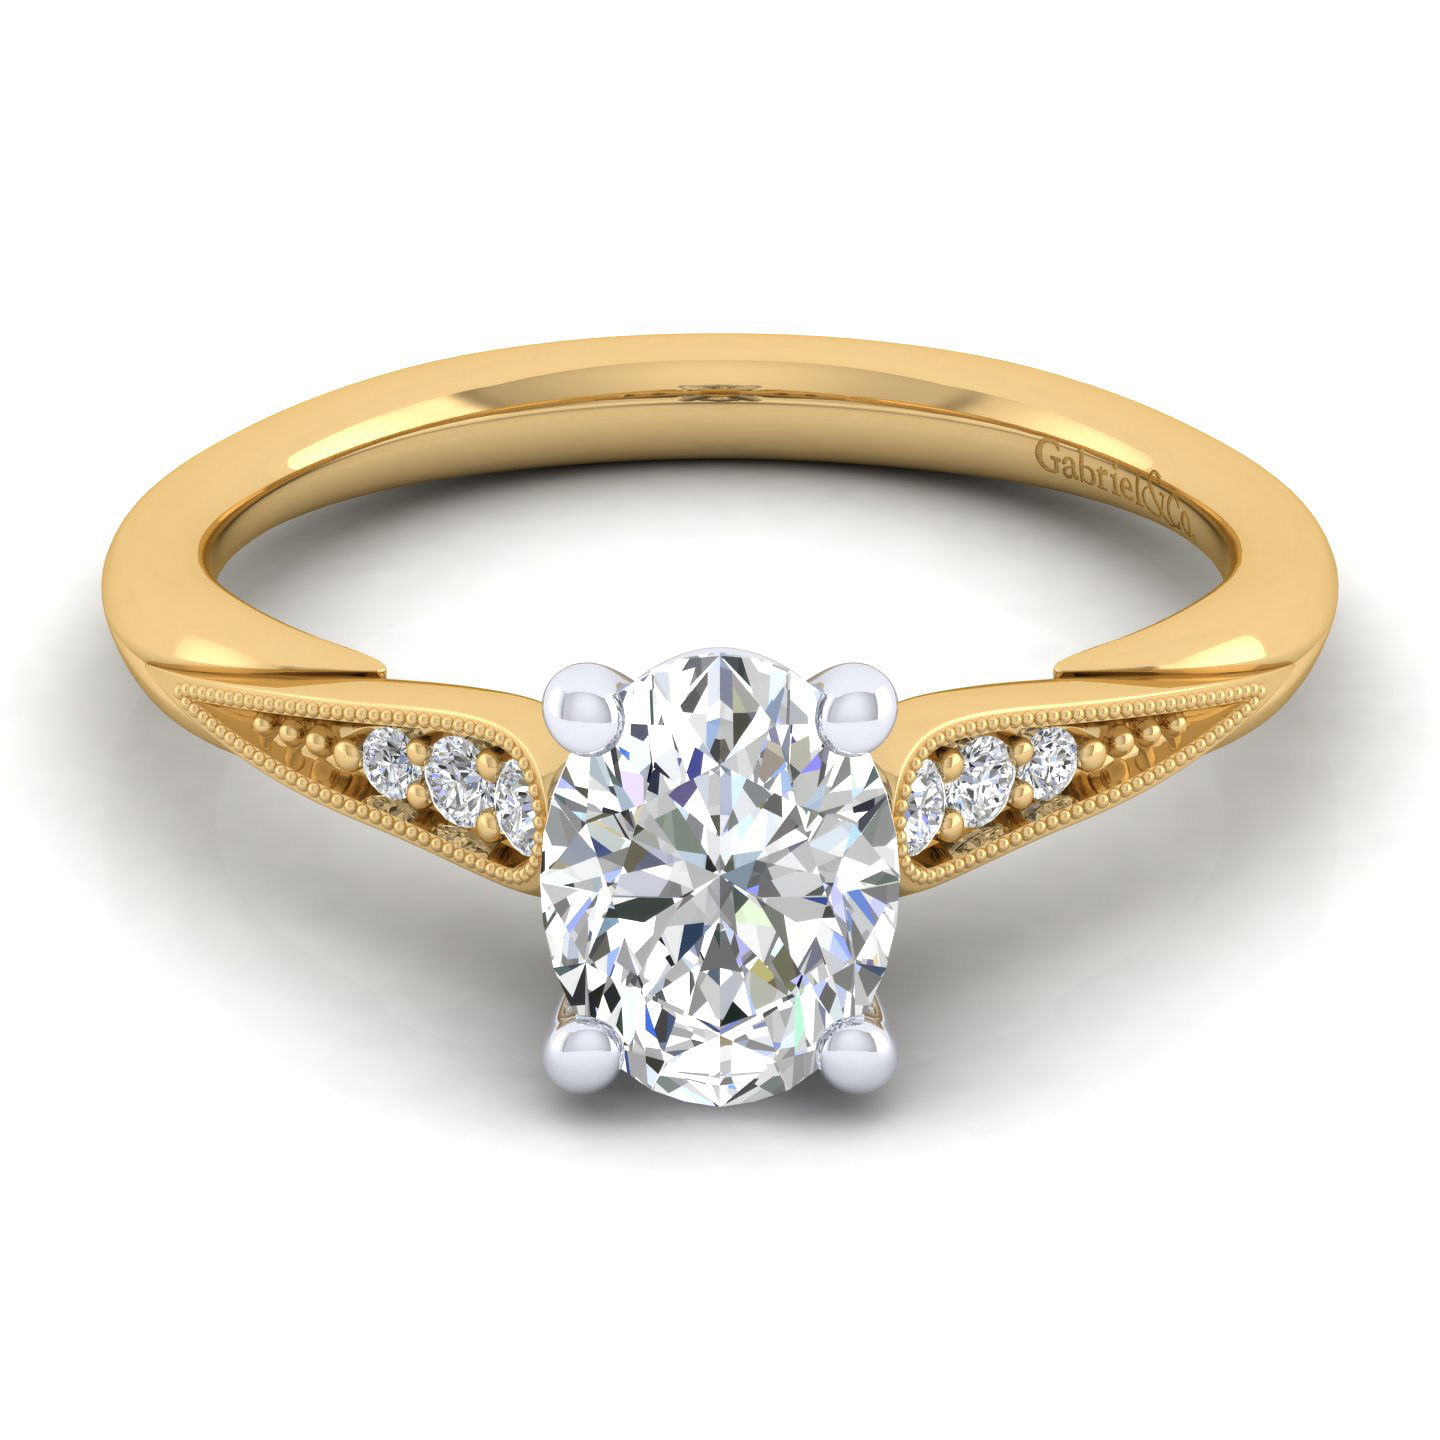 Riley - 14K White-Yellow Gold Oval Diamond Engagement Ring